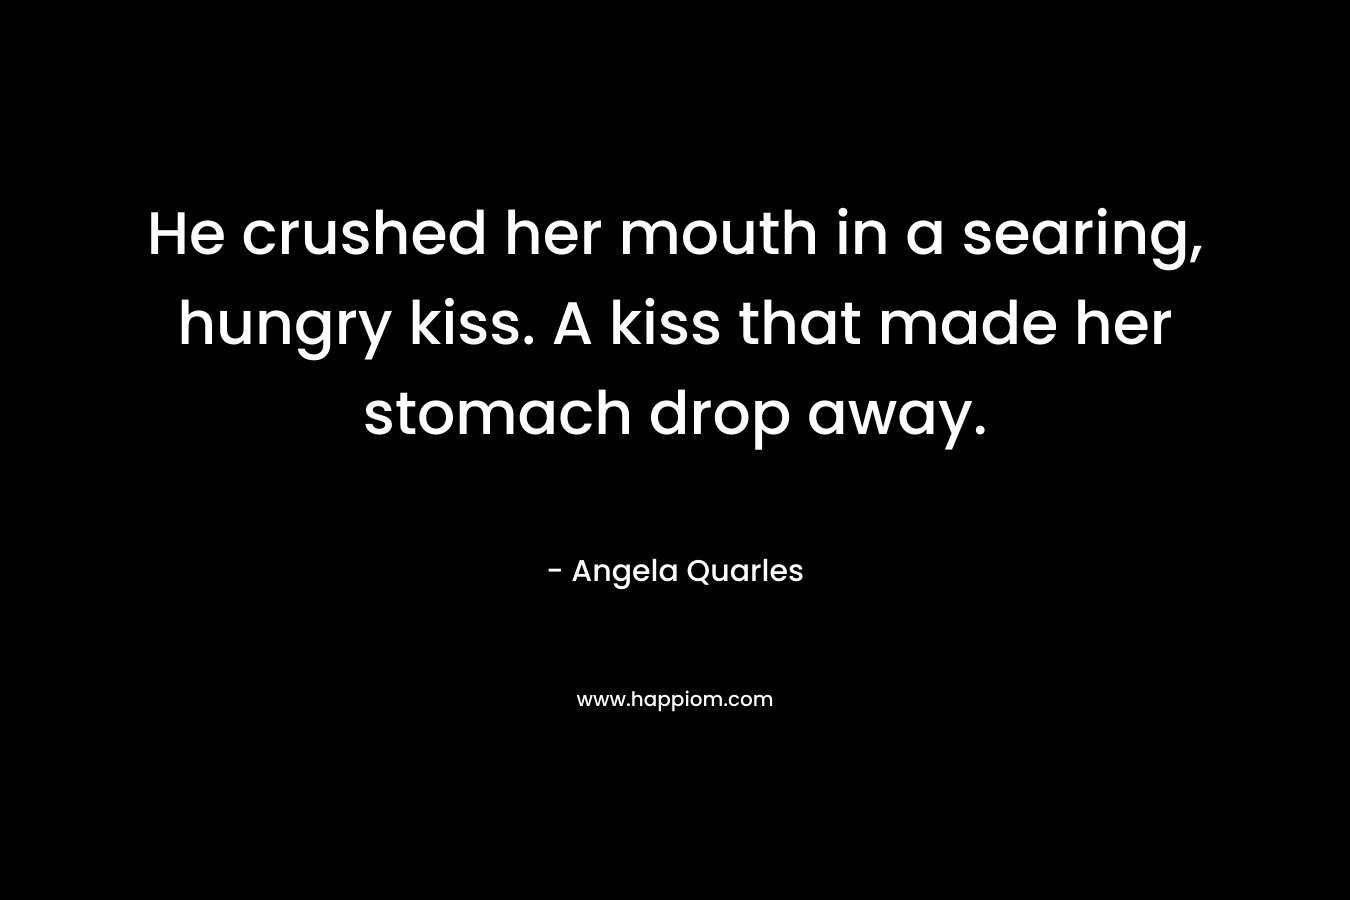 He crushed her mouth in a searing, hungry kiss. A kiss that made her stomach drop away. – Angela Quarles